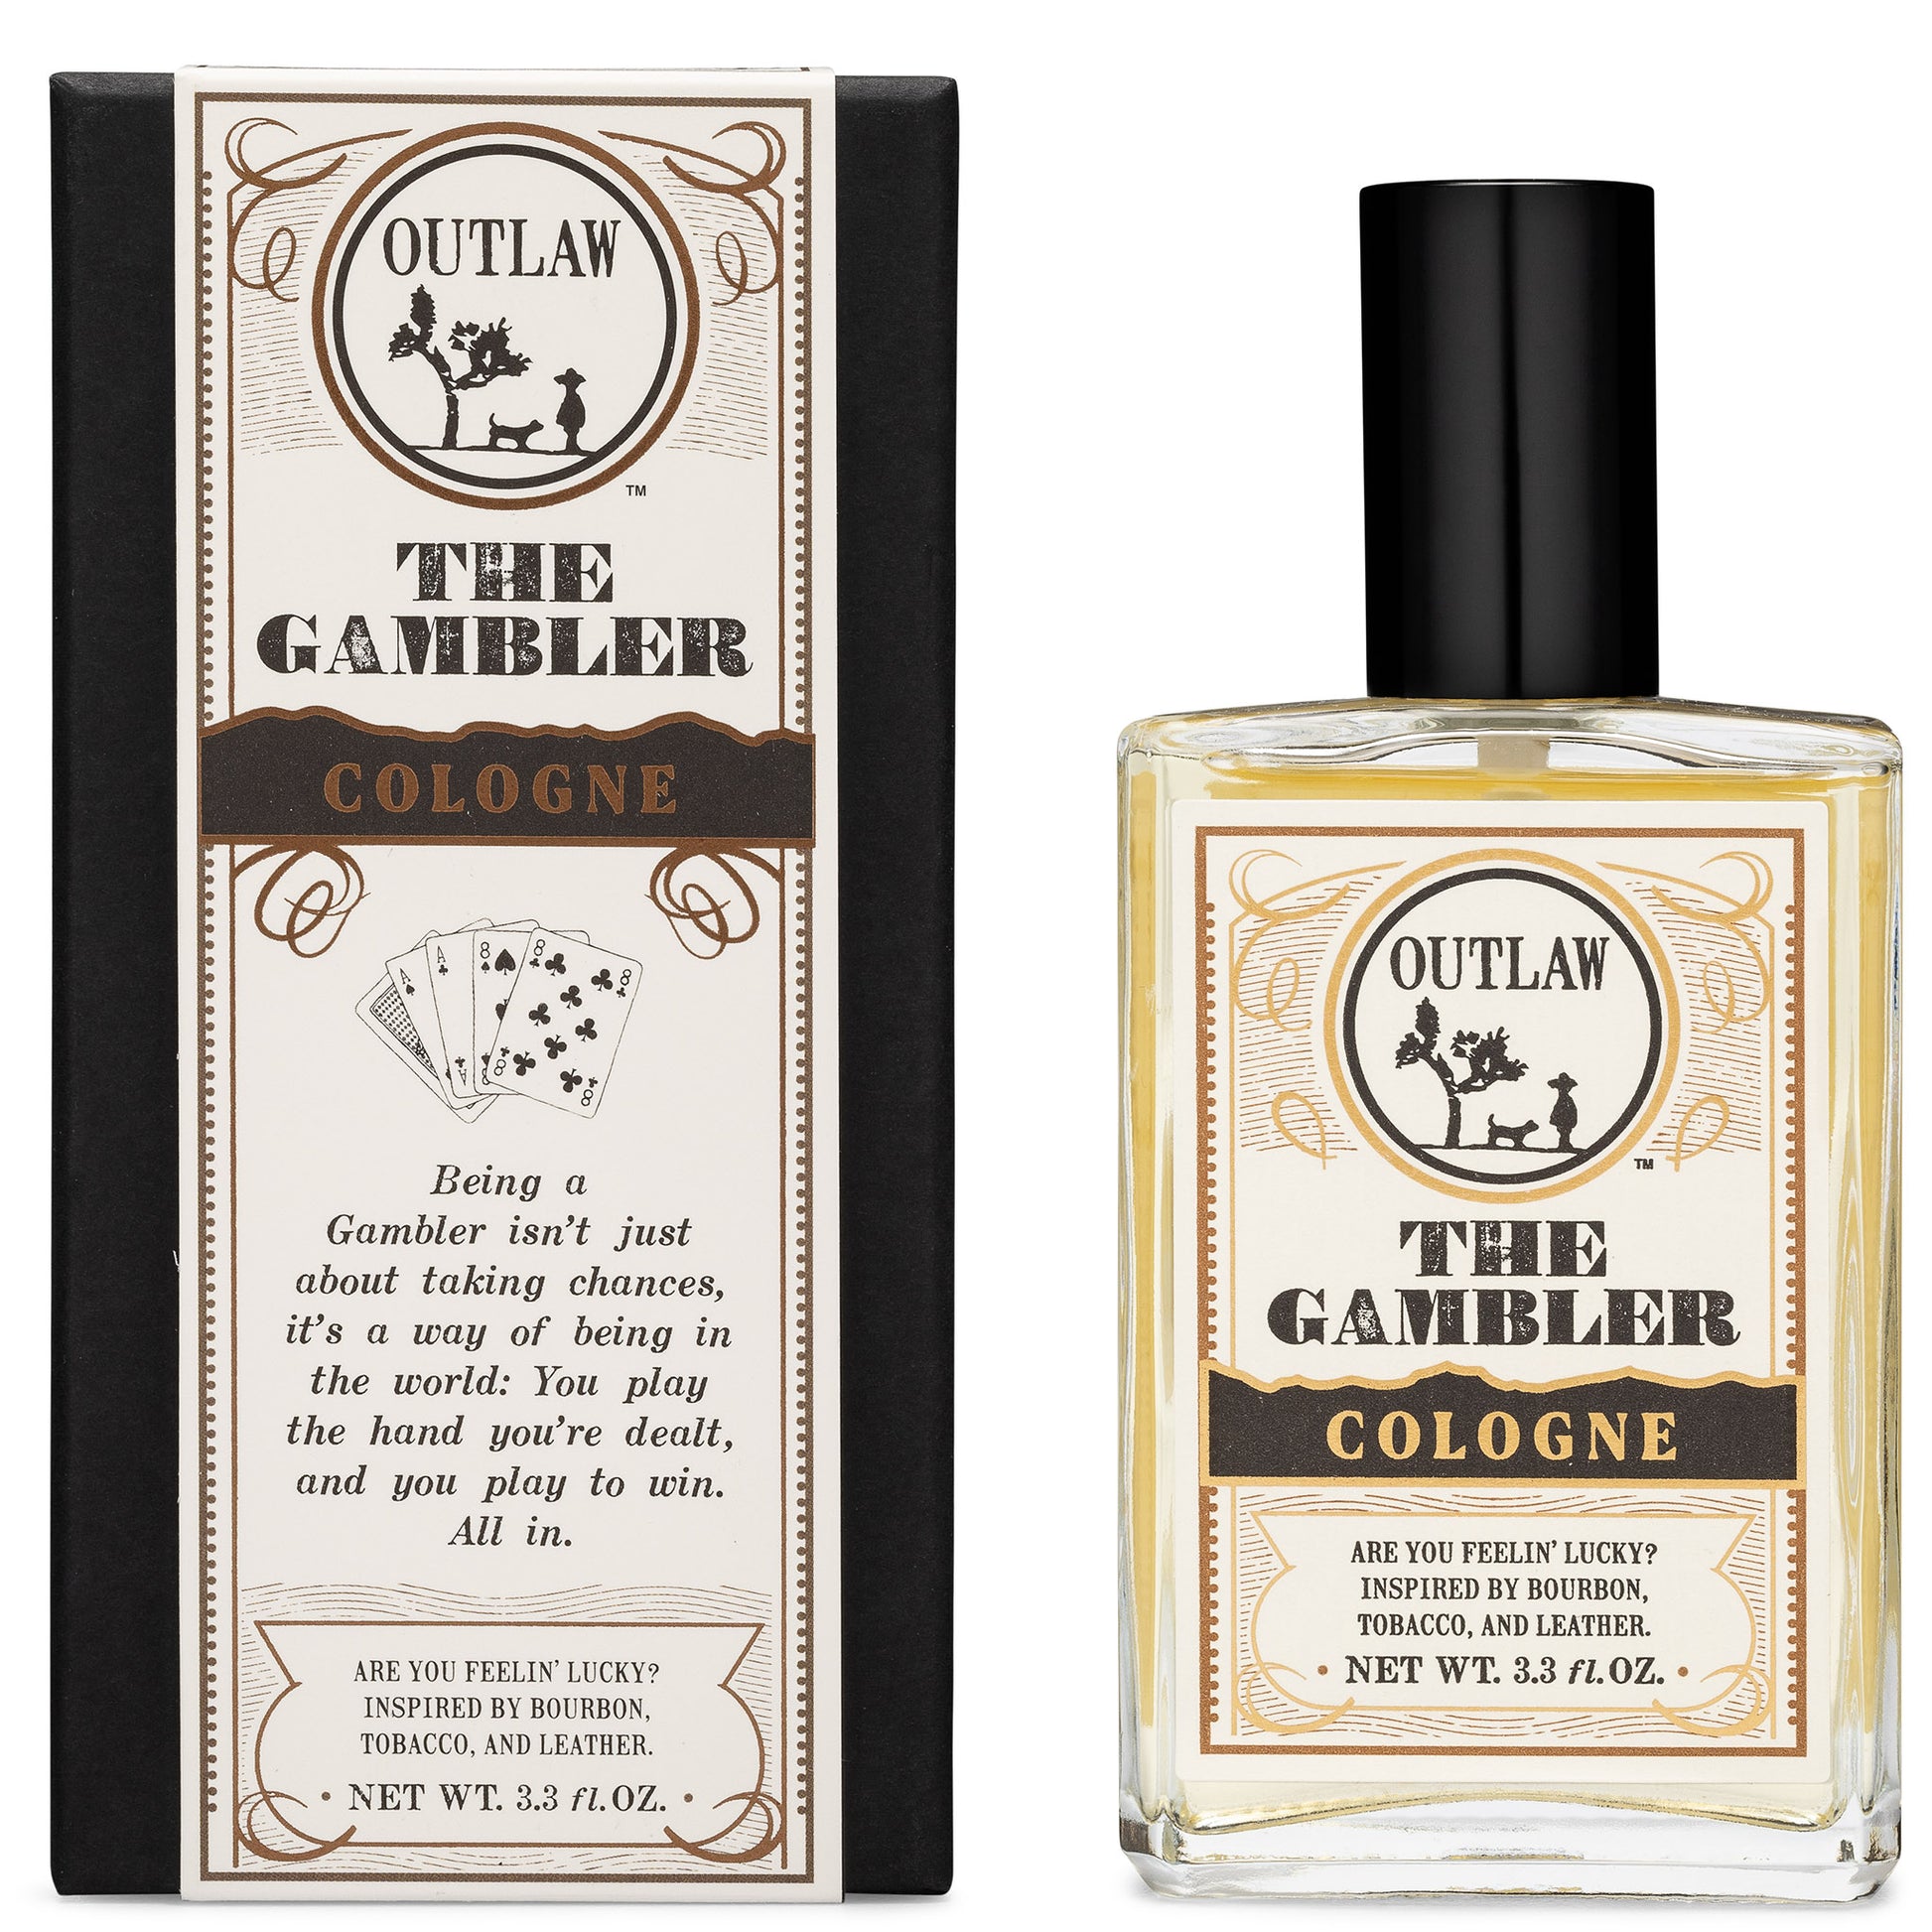 Thoughts on these? : Colognes